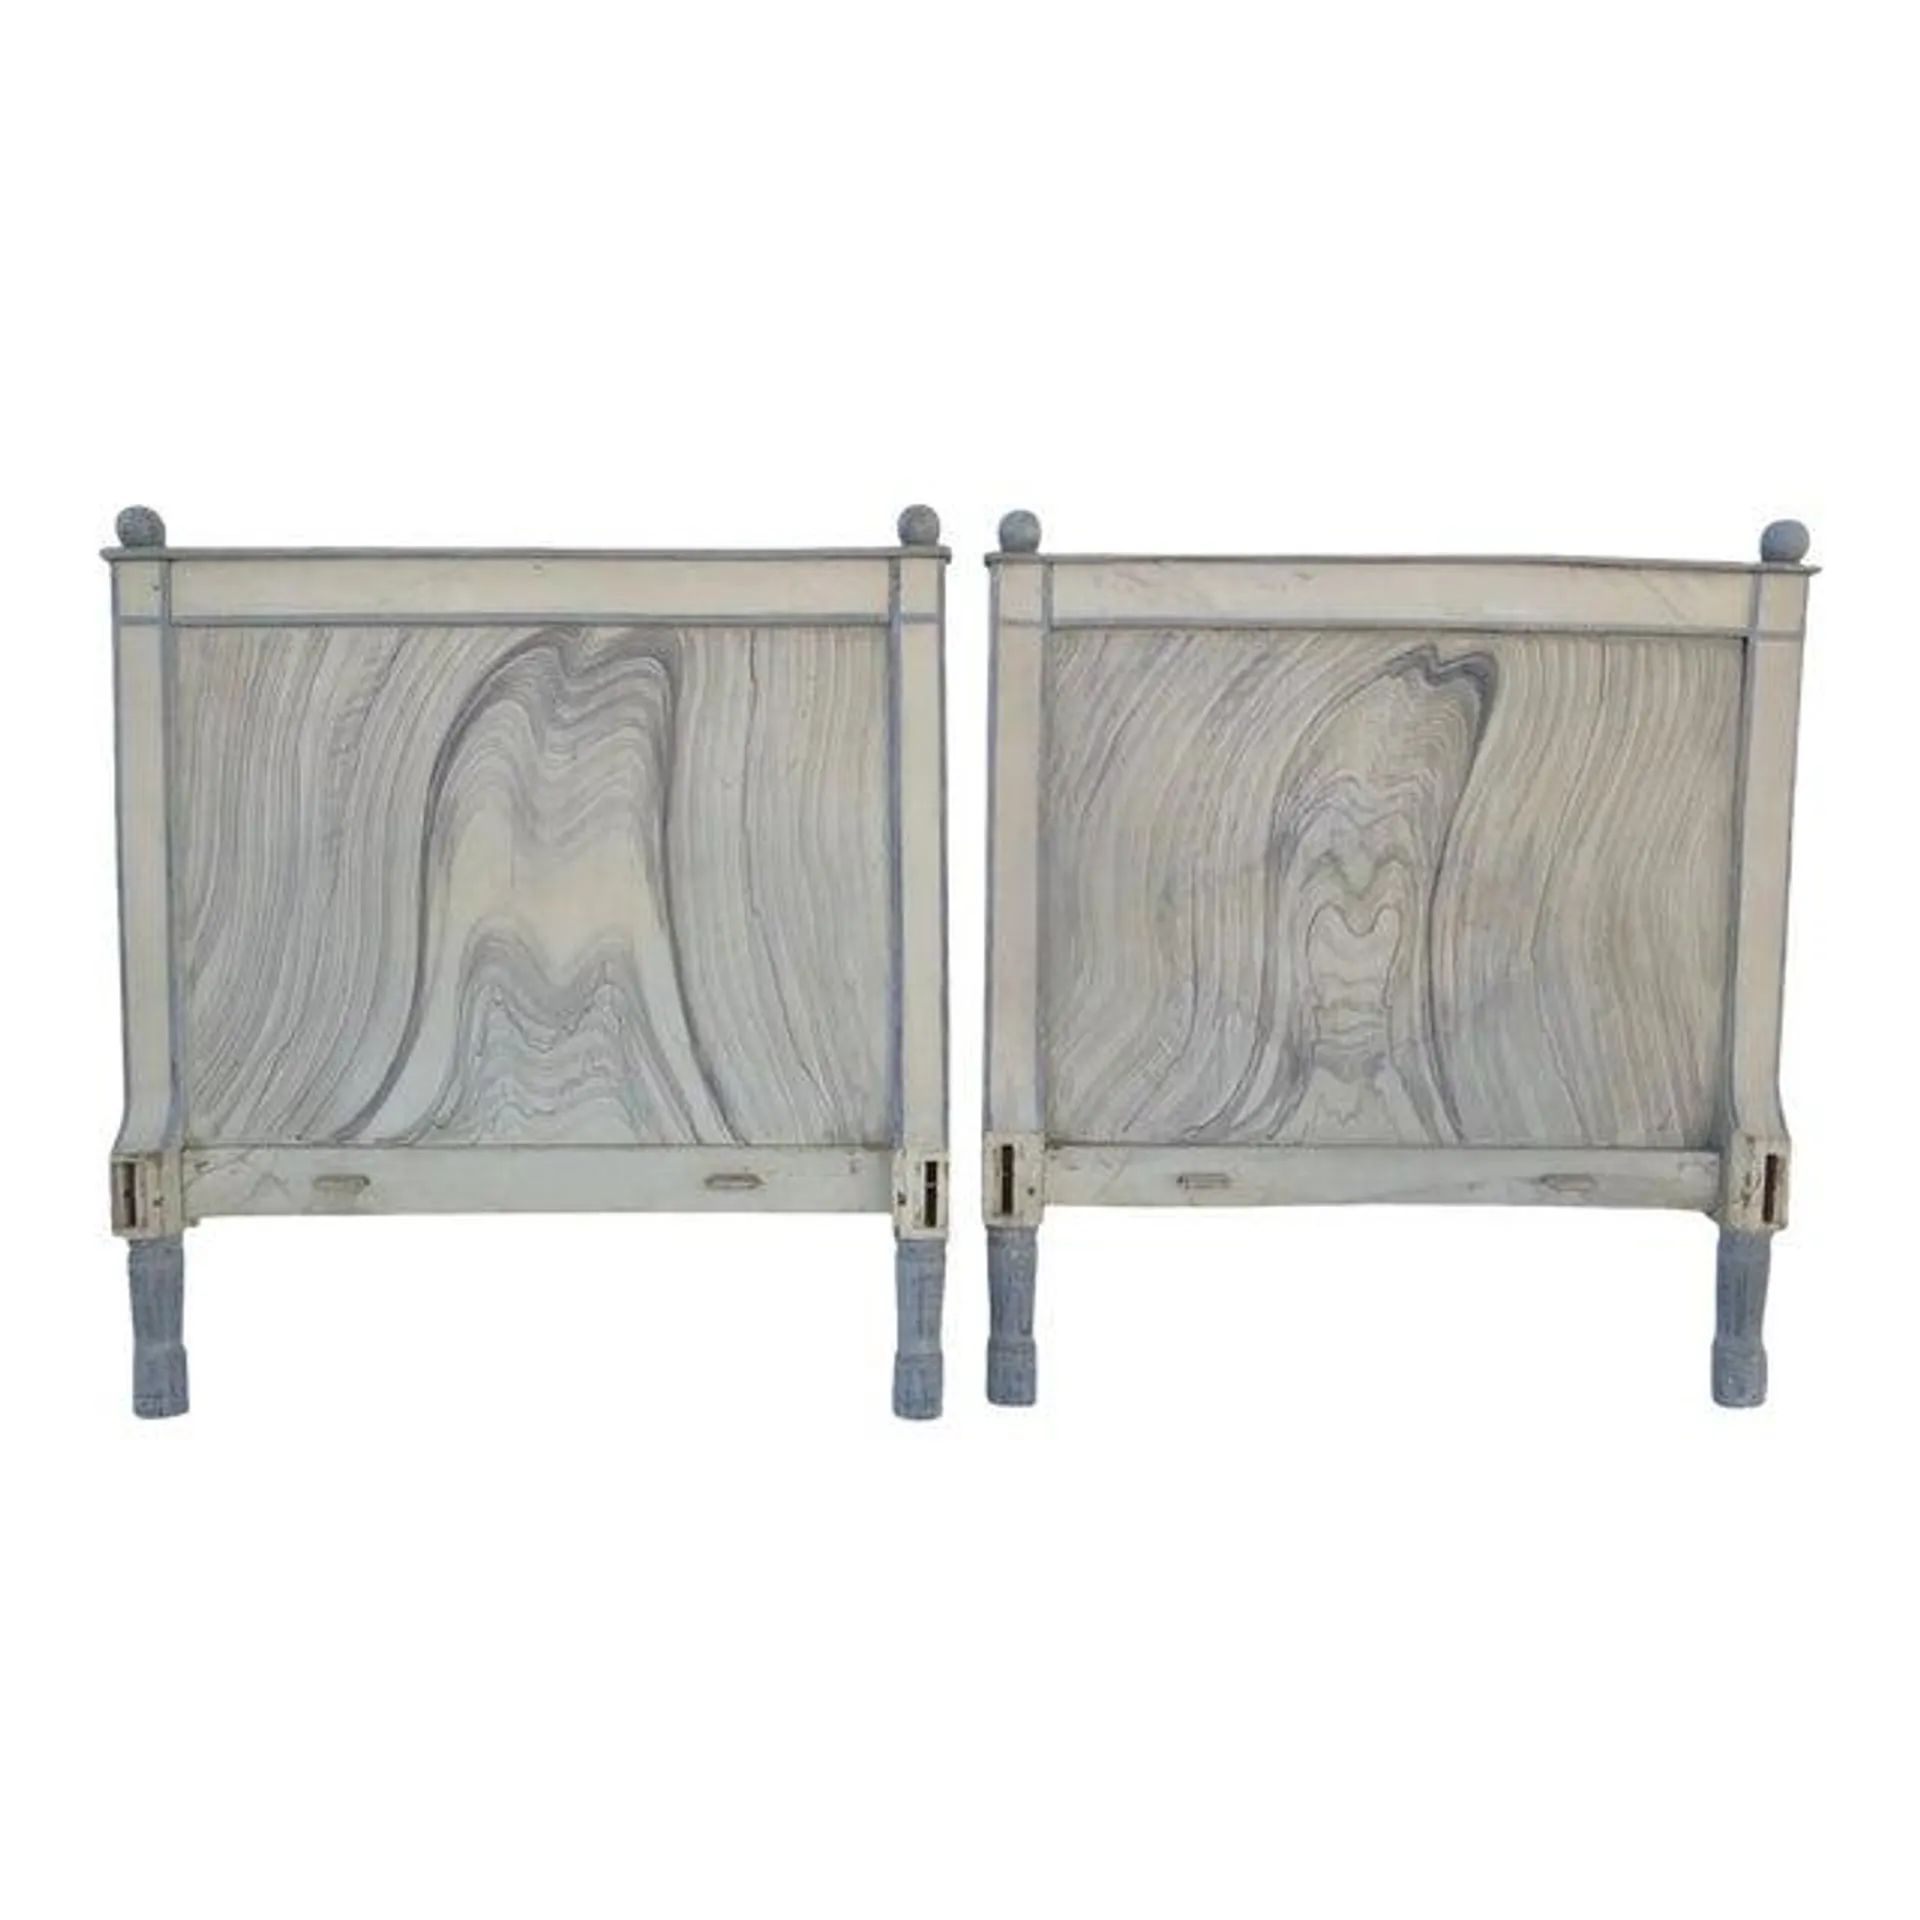 Early 19th Century Pine Twin Beds Headboards Hand-Painted Faux Finish Dowel Construction